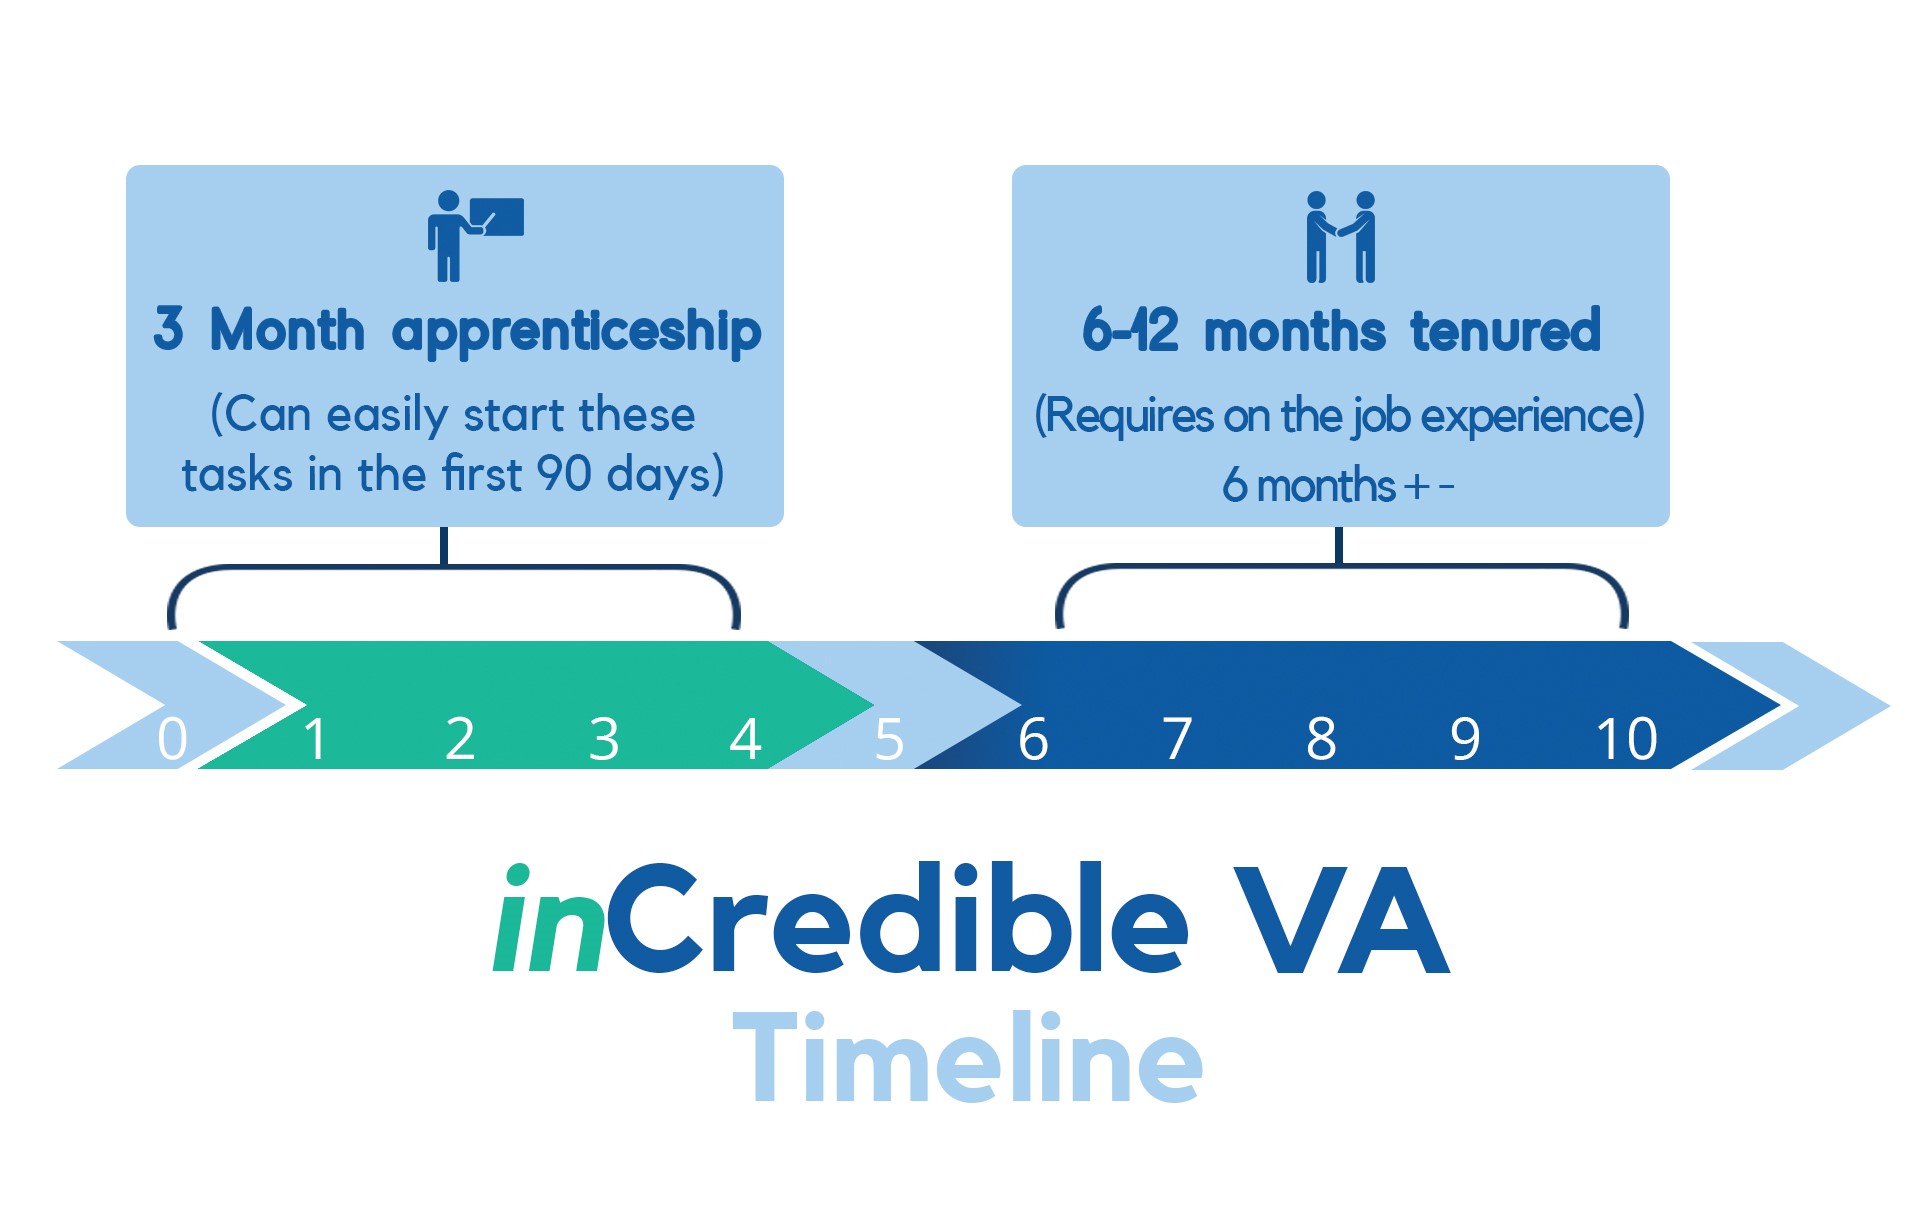 inCredible VA timeline what you can expect from your property management VA"